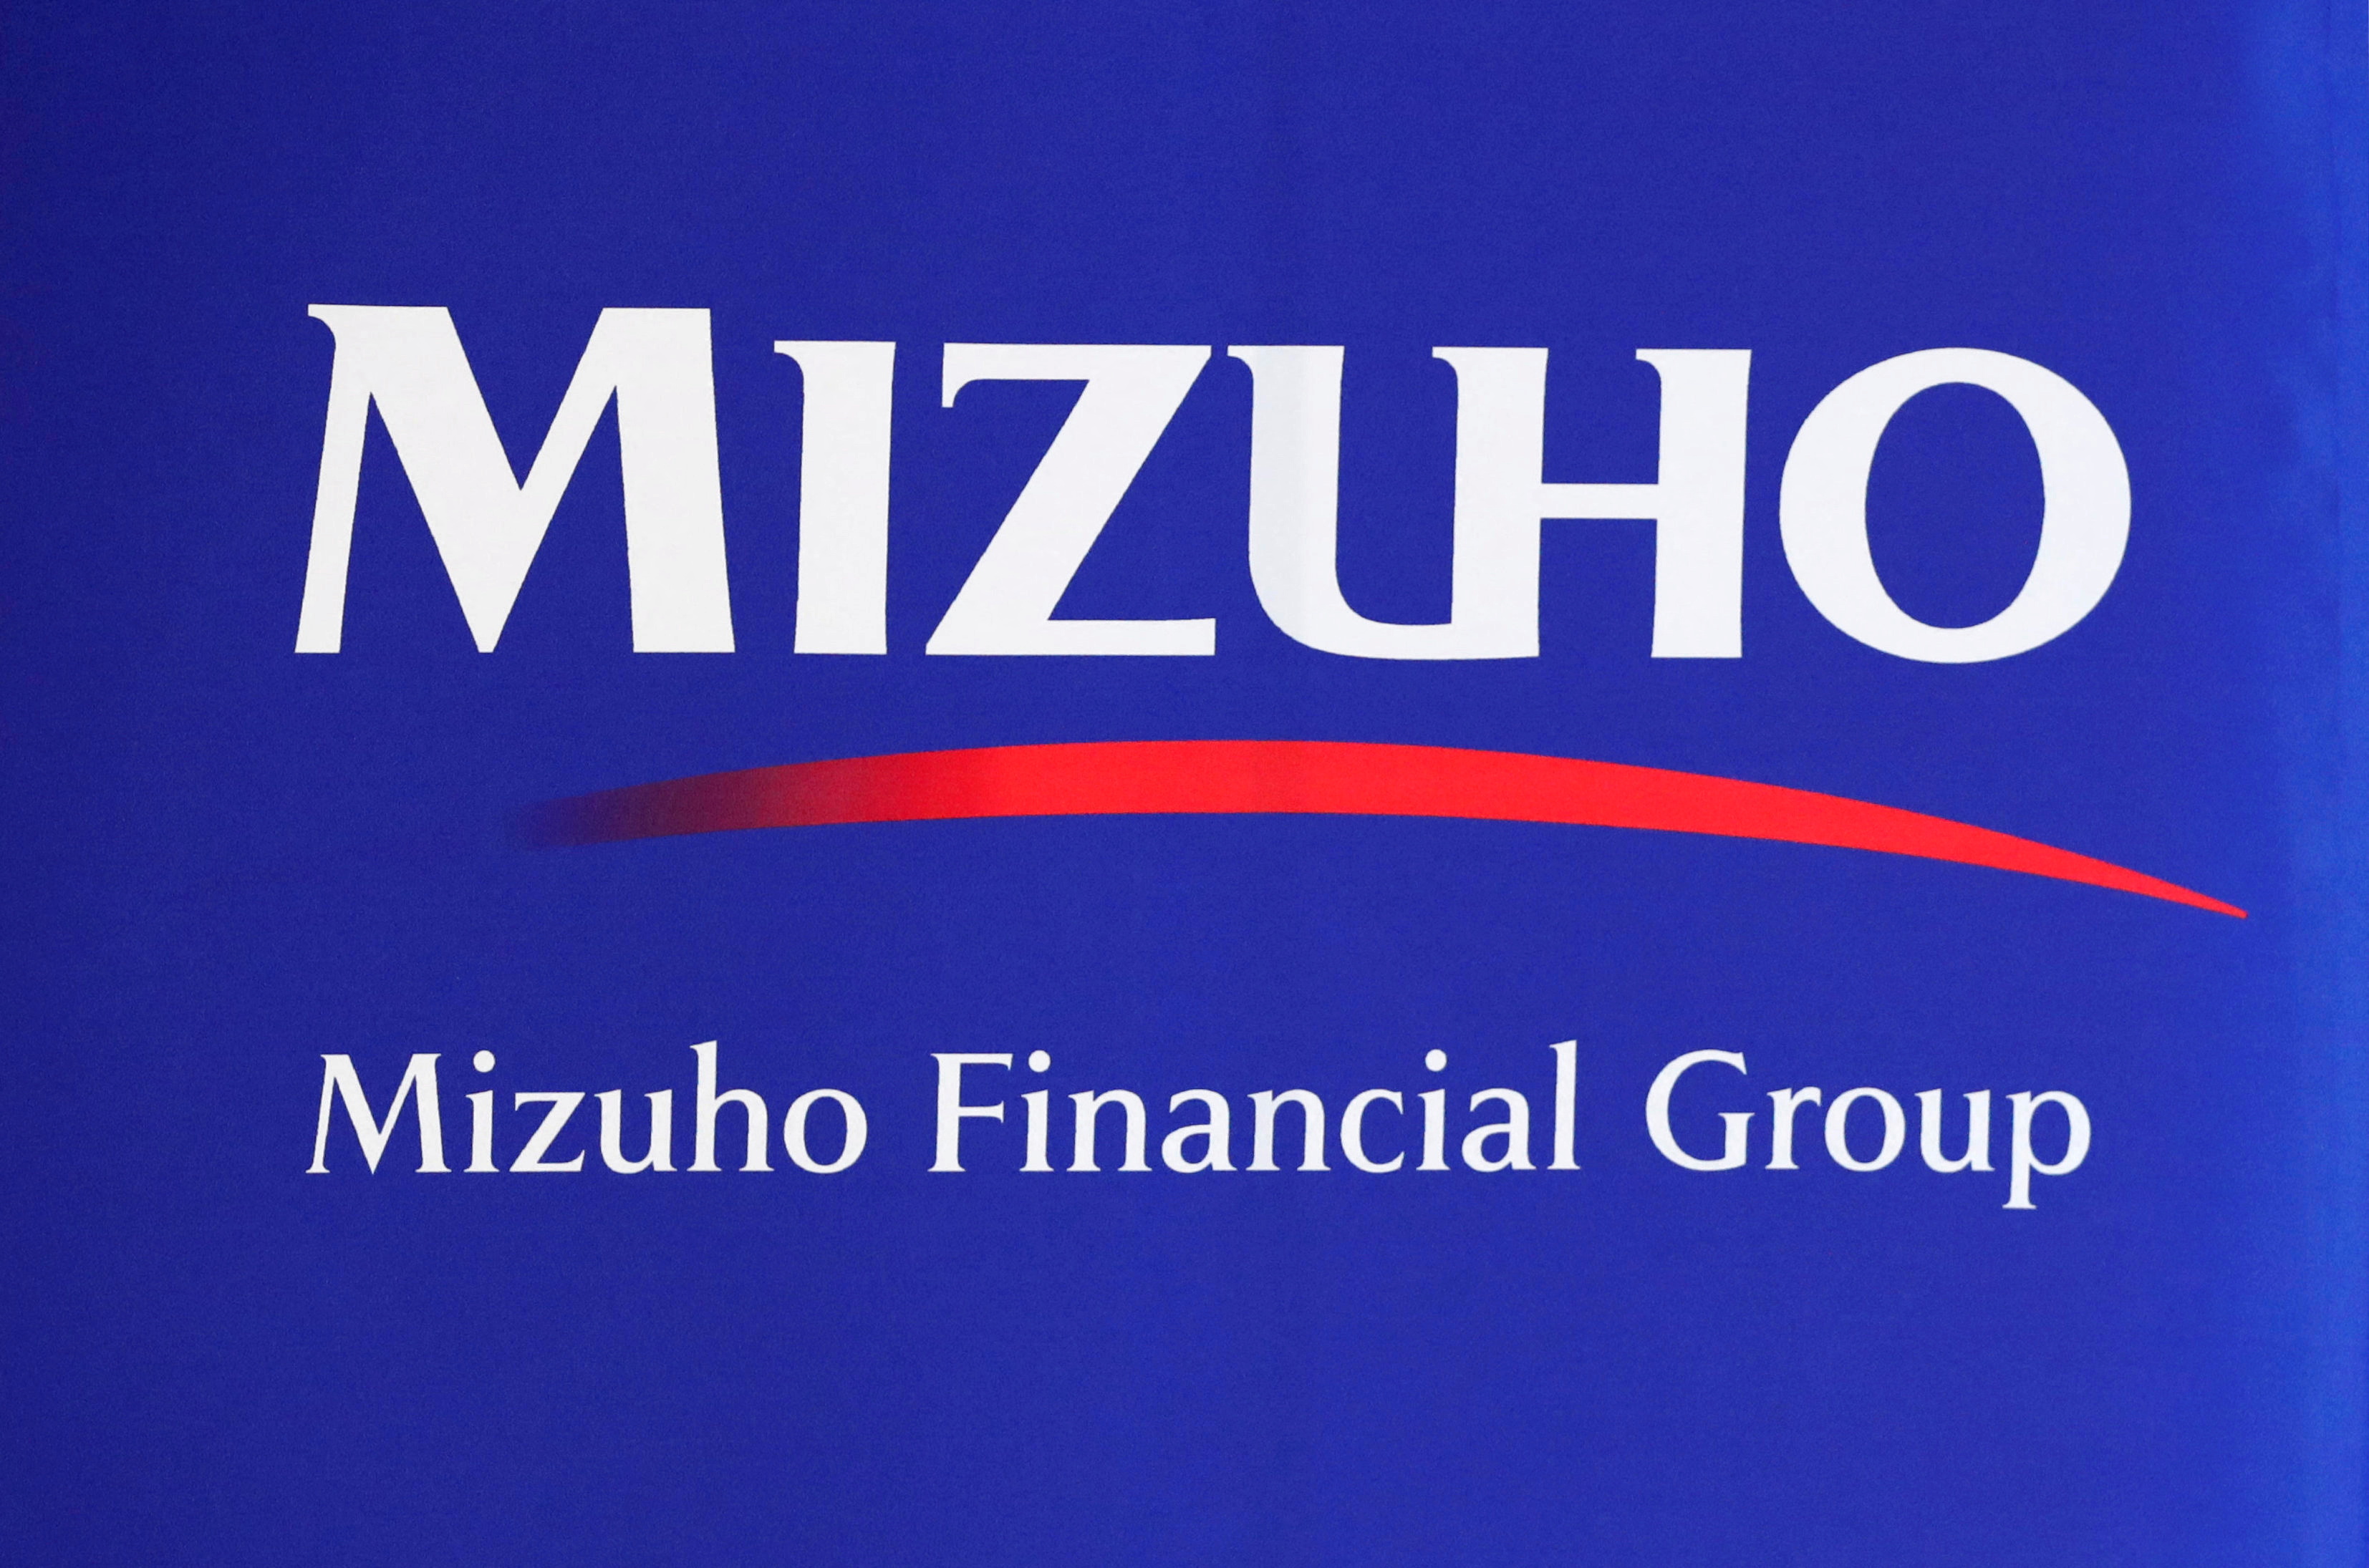 Mizuho Financial Group logo is seen at the company's headquarters in Tokyo